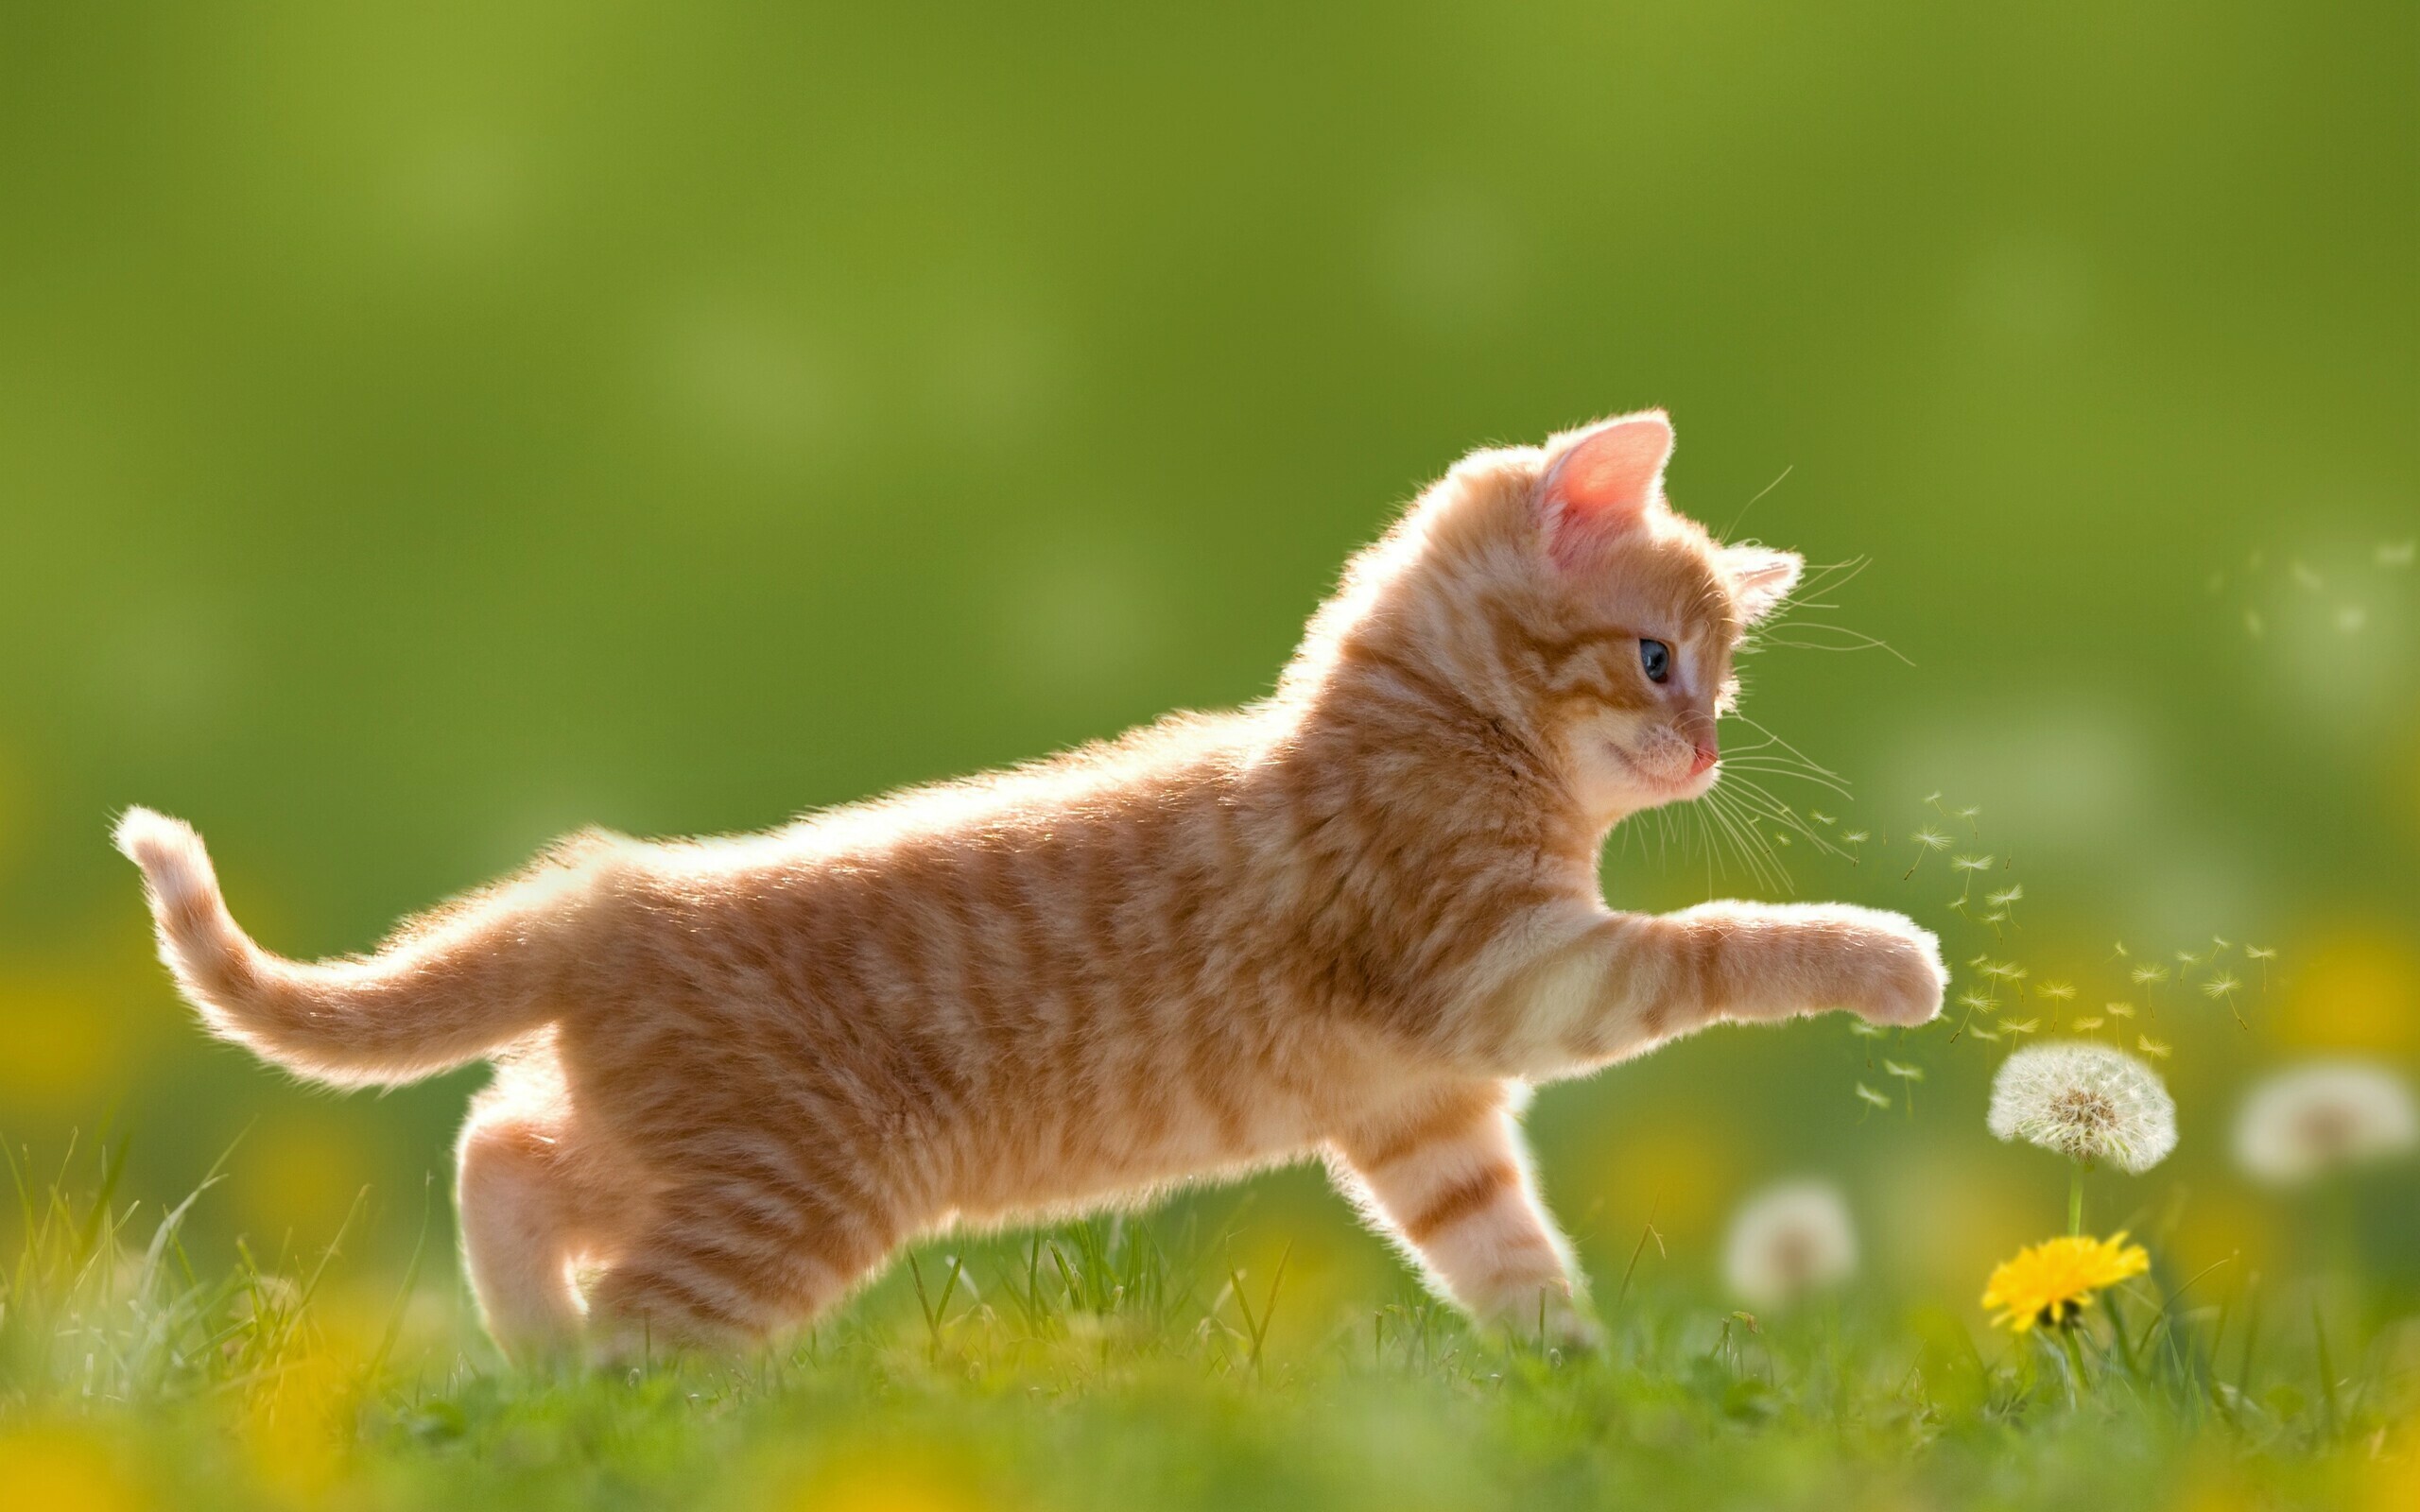 Kitten: Orange cat breeds, A furry animal that has a long tail and sharp claws. 2560x1600 HD Wallpaper.